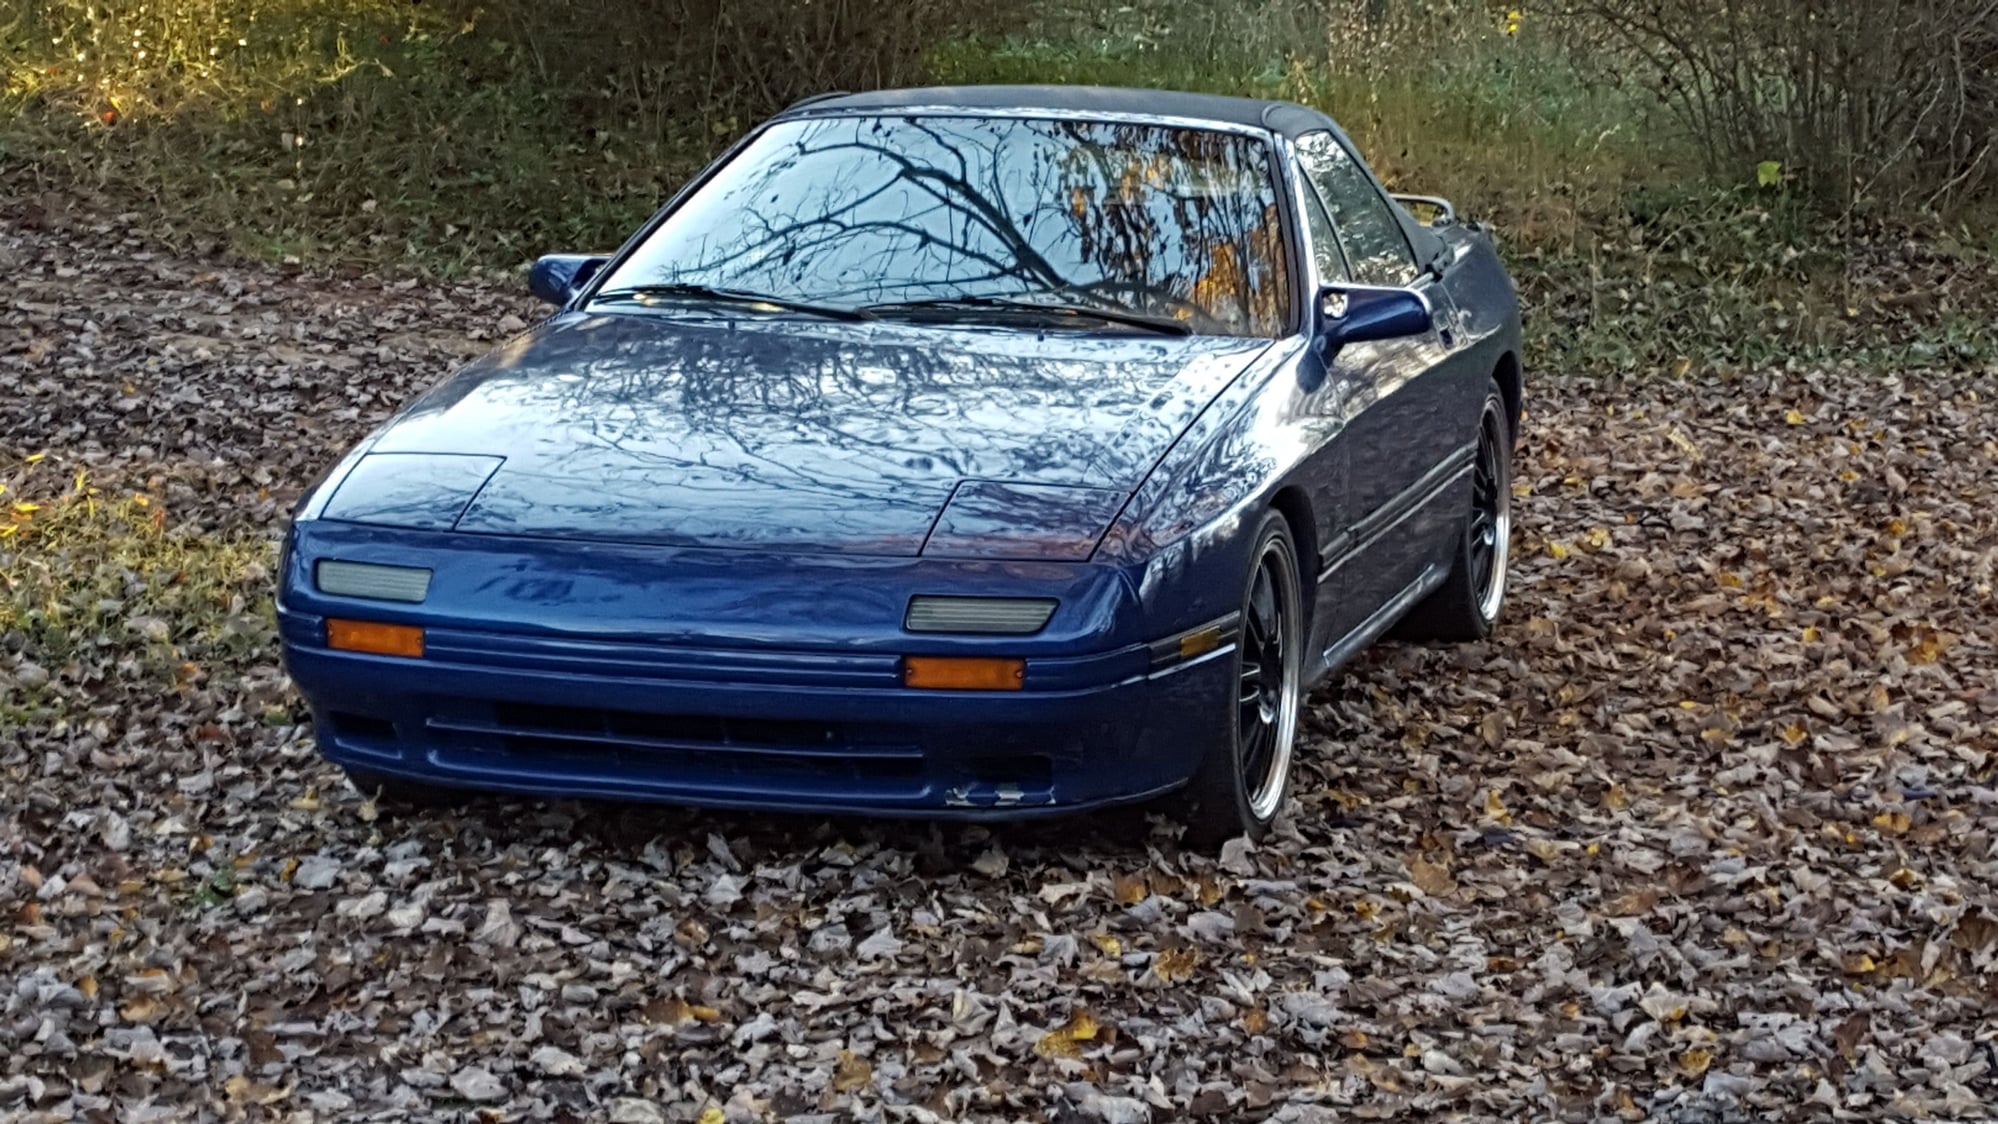 1987 - 1992 Mazda RX-7 - WTB: FC Turbo Diff Assembly - New or Used - Other - 2WD - Manual - Coupe - Scott Afb, IL 62225, United States